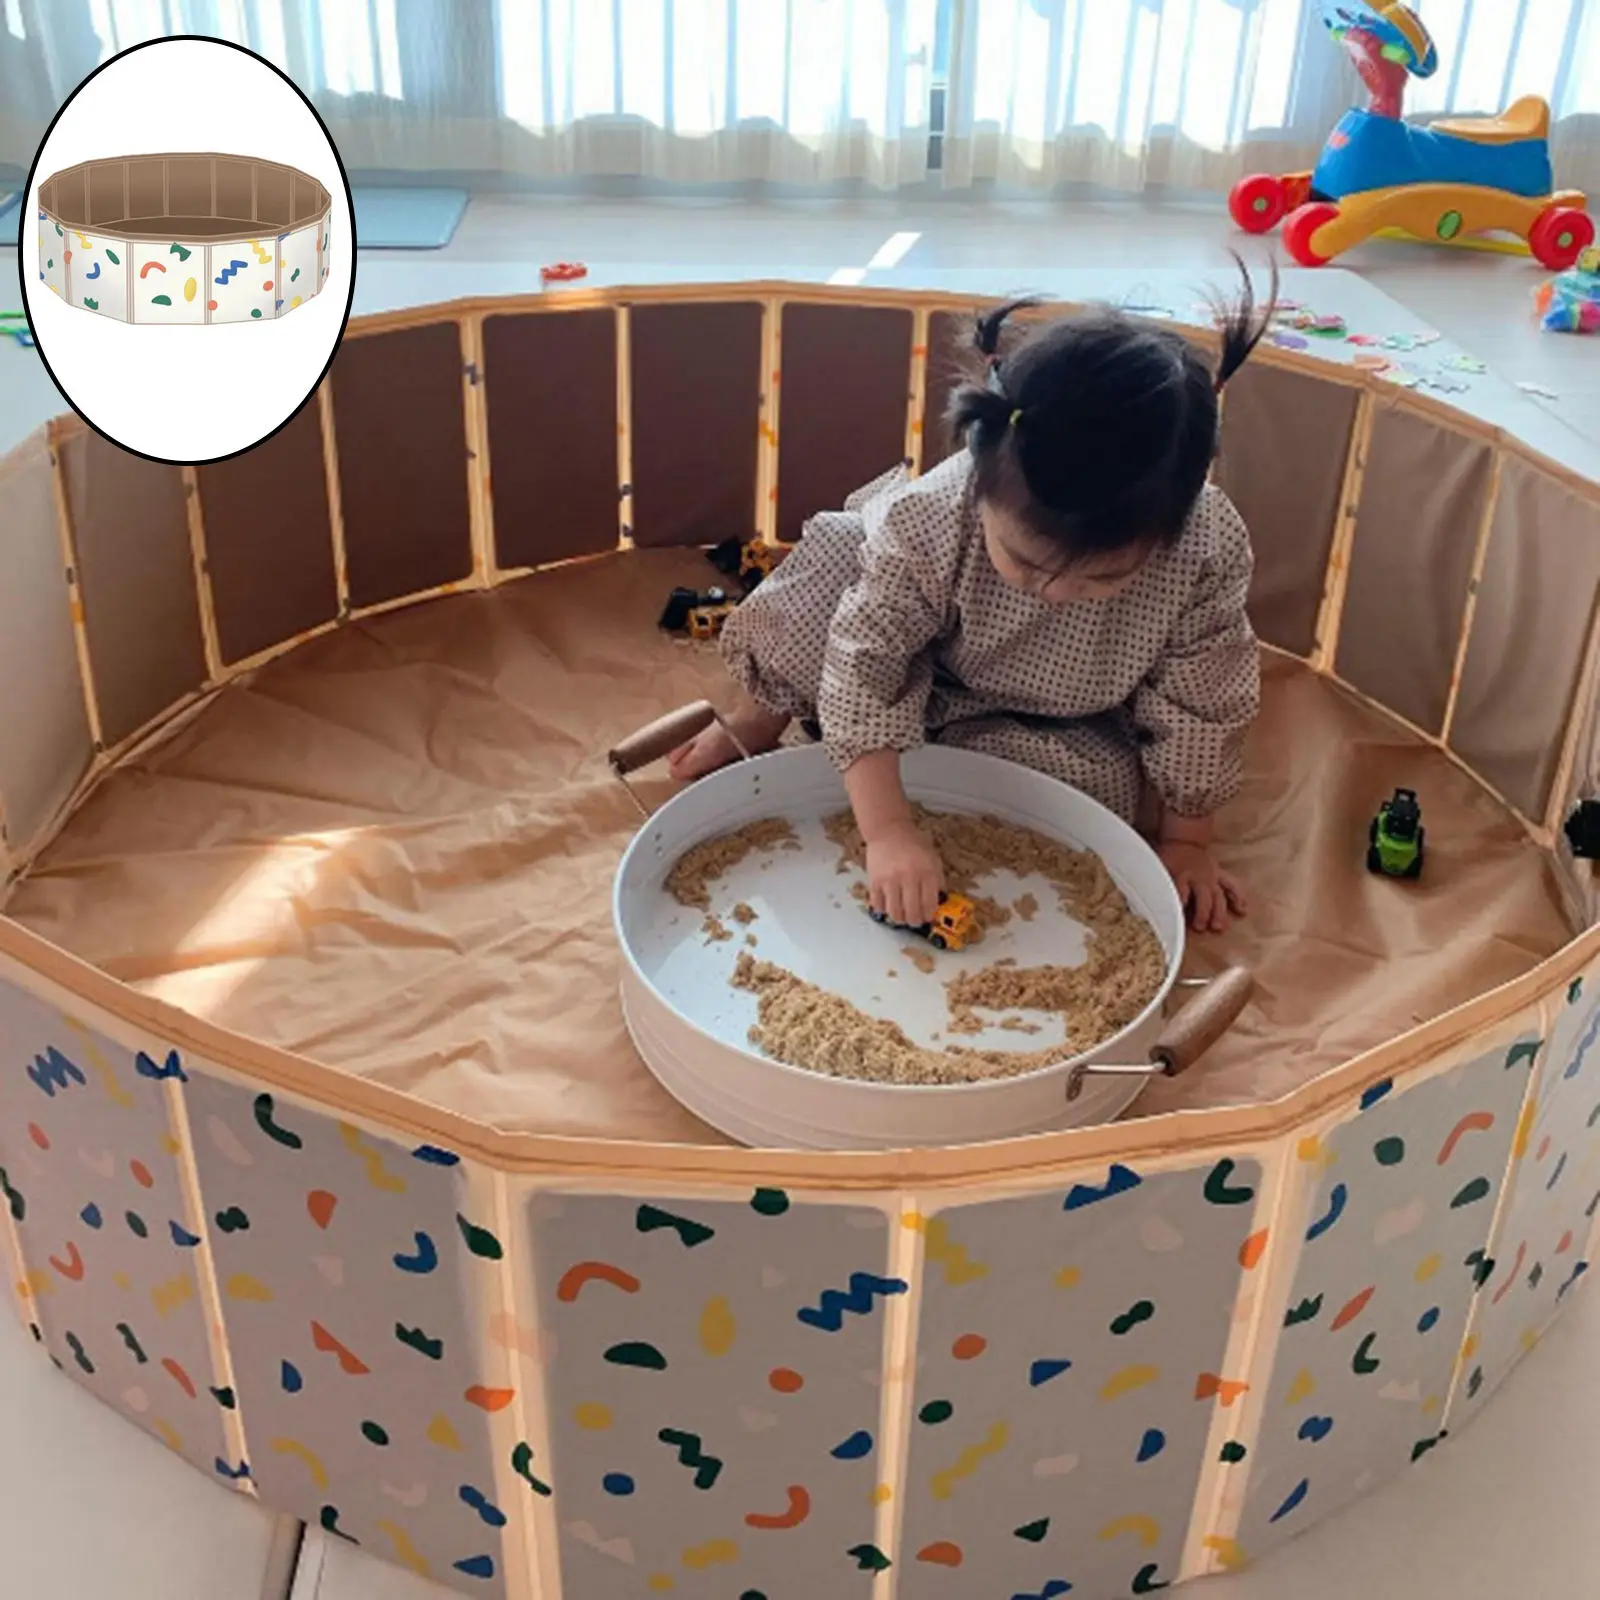 Multifunctional Portable Foldable Kid`s Swimming Pool Play Pool Fences Activity Space Game Pool Kiddie Pool for Toddler Present